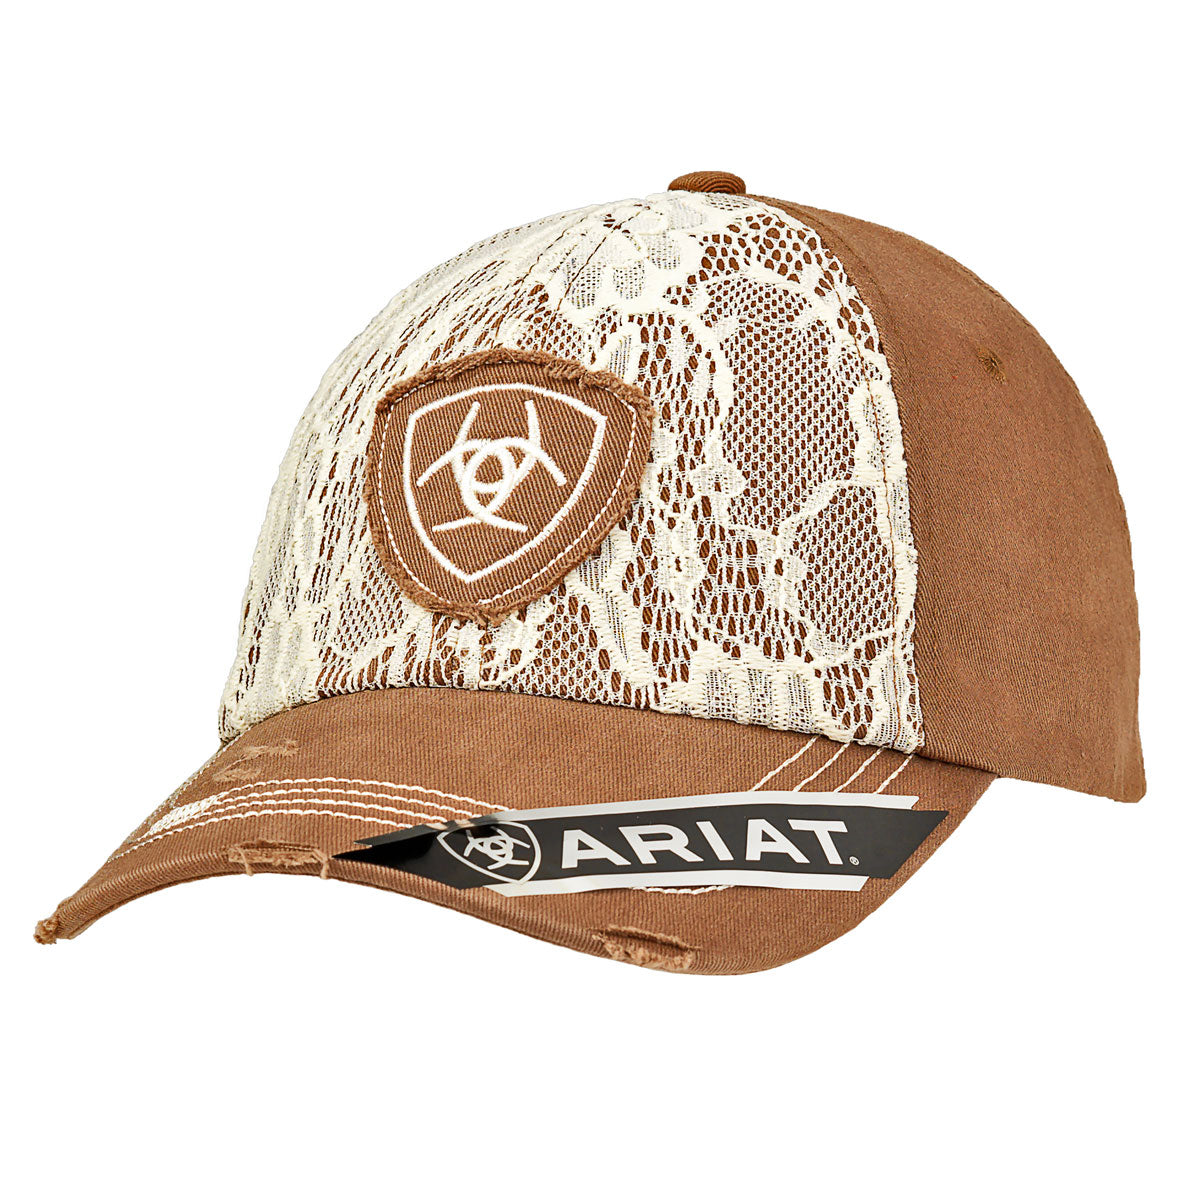 Ariat Ladies Velcro Back Cap - Brown w/Lace Overlay